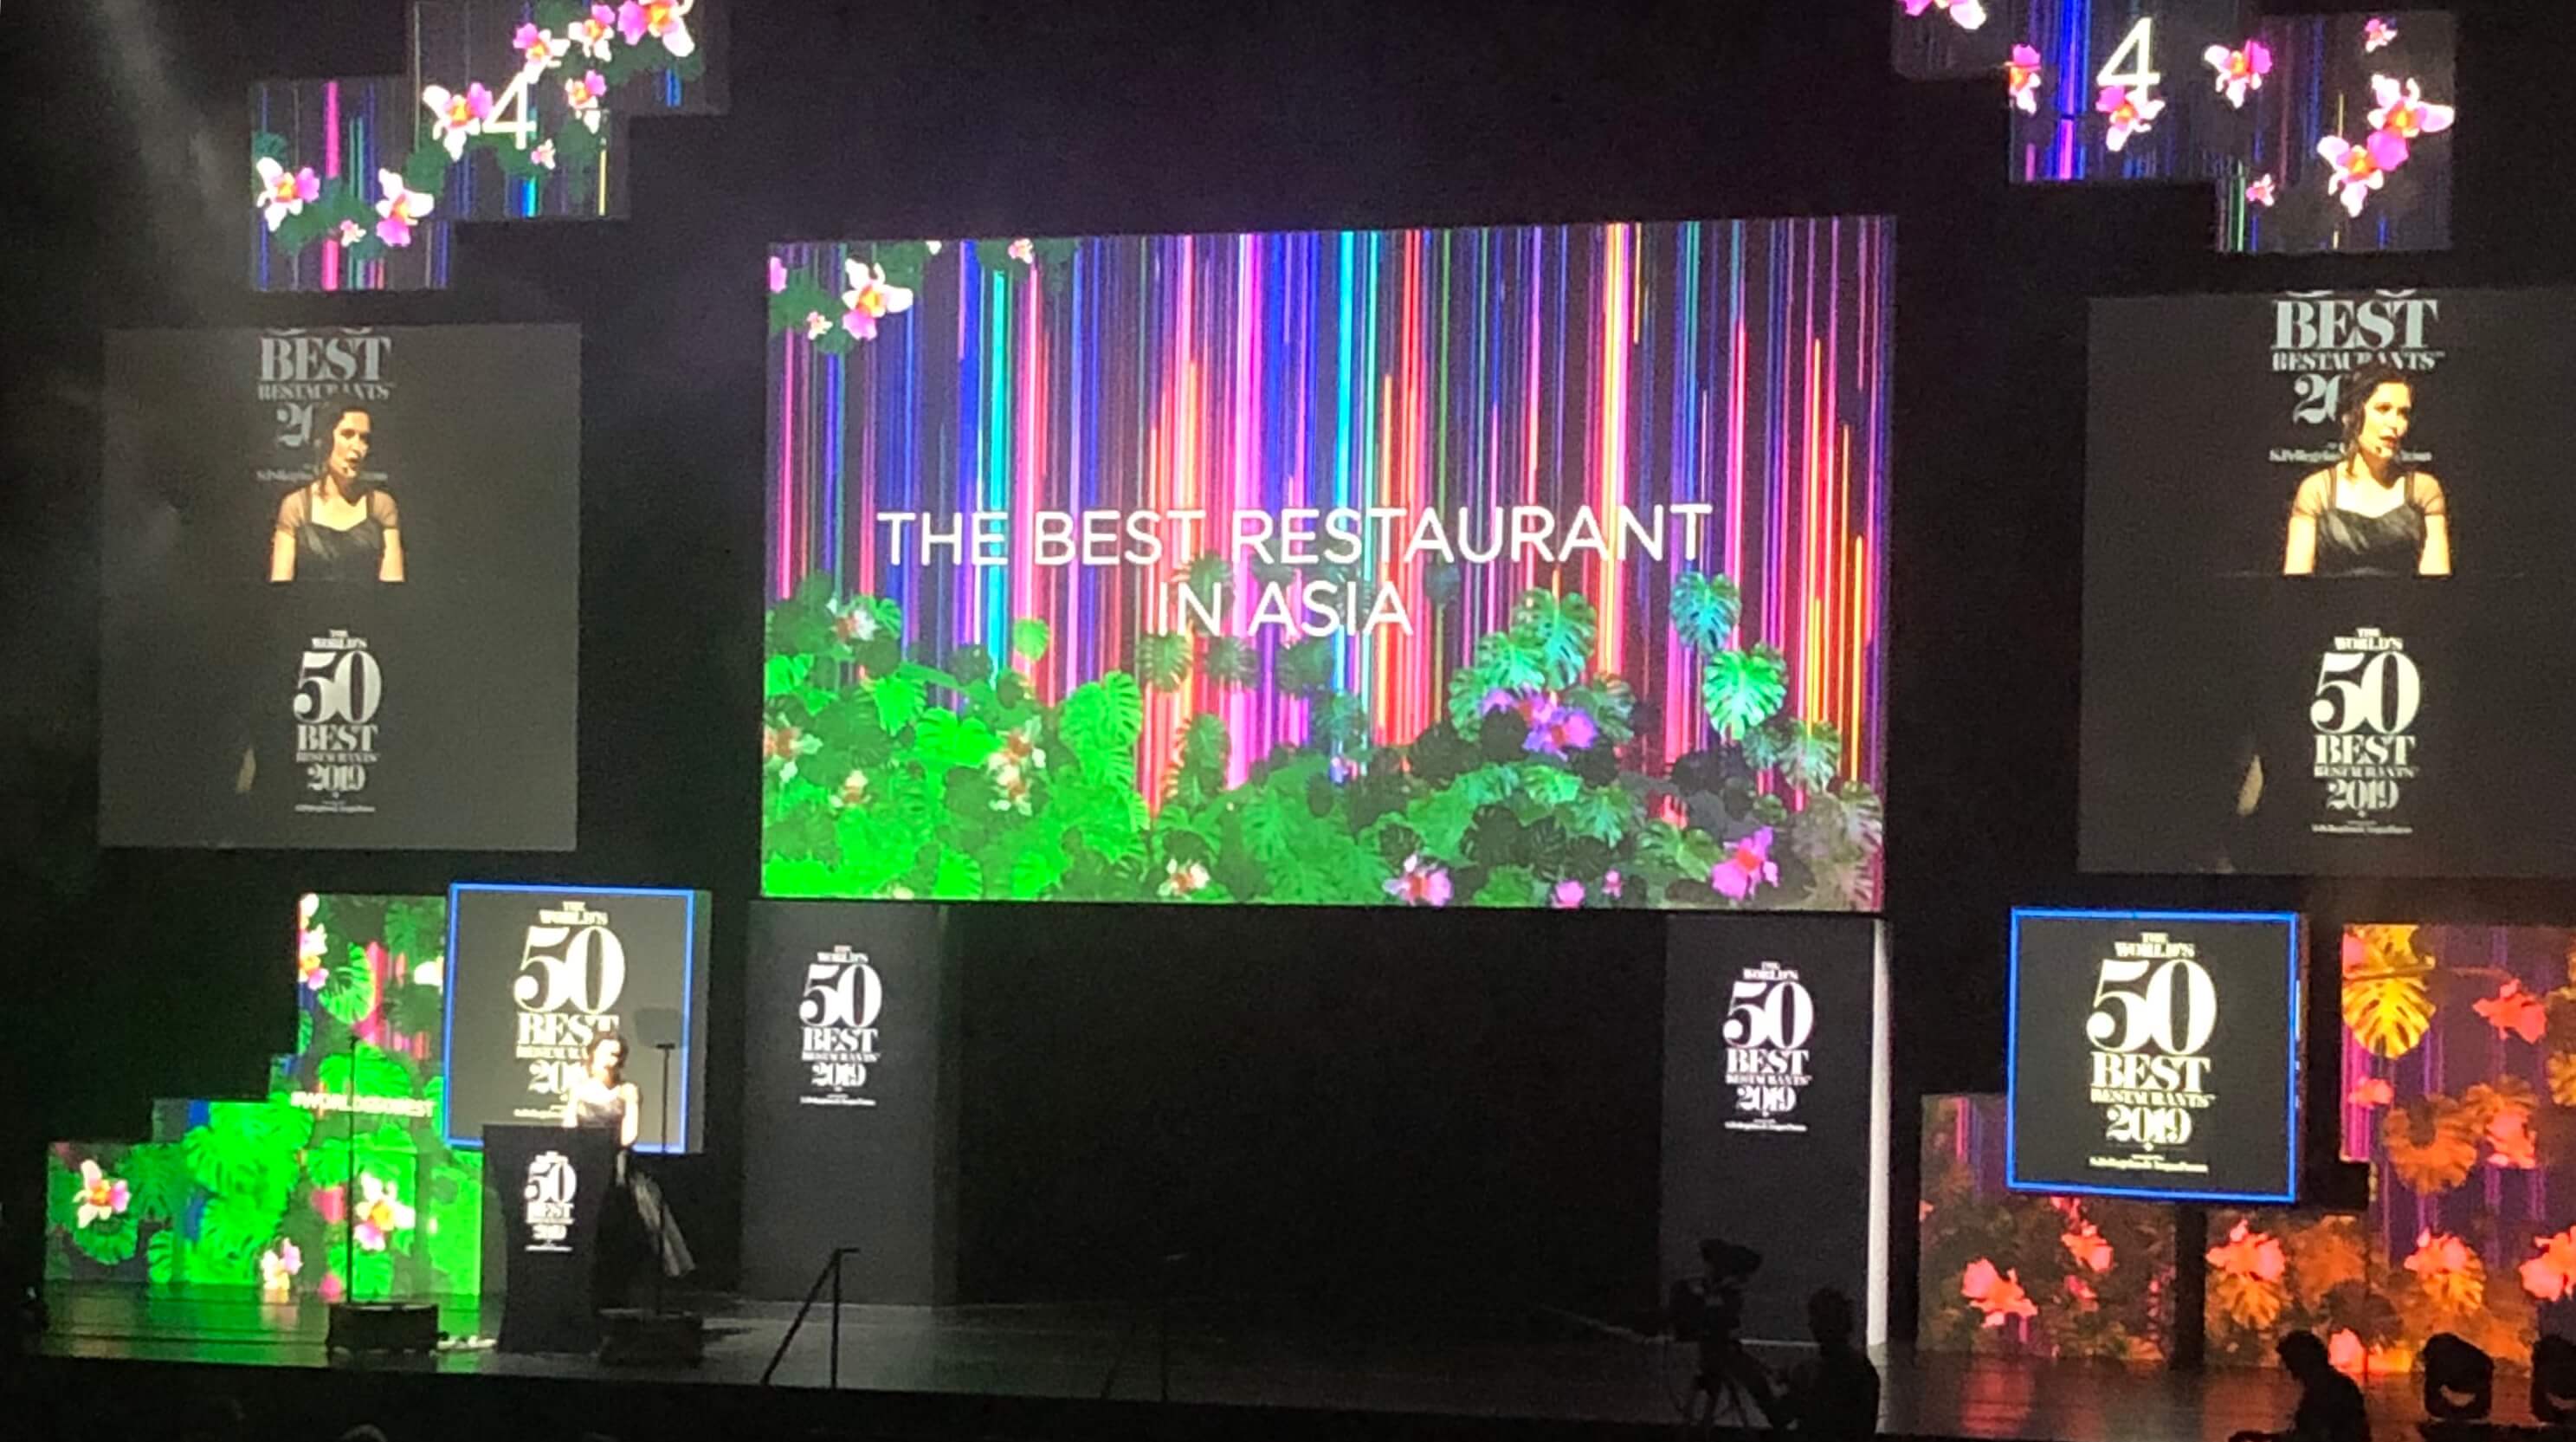 Announcement of the “Best Restaurant in Asia” at the 50 World’s Best Restaurants 2019 ceremony in Singapore. Photo: Cindy Kuan/Coconuts